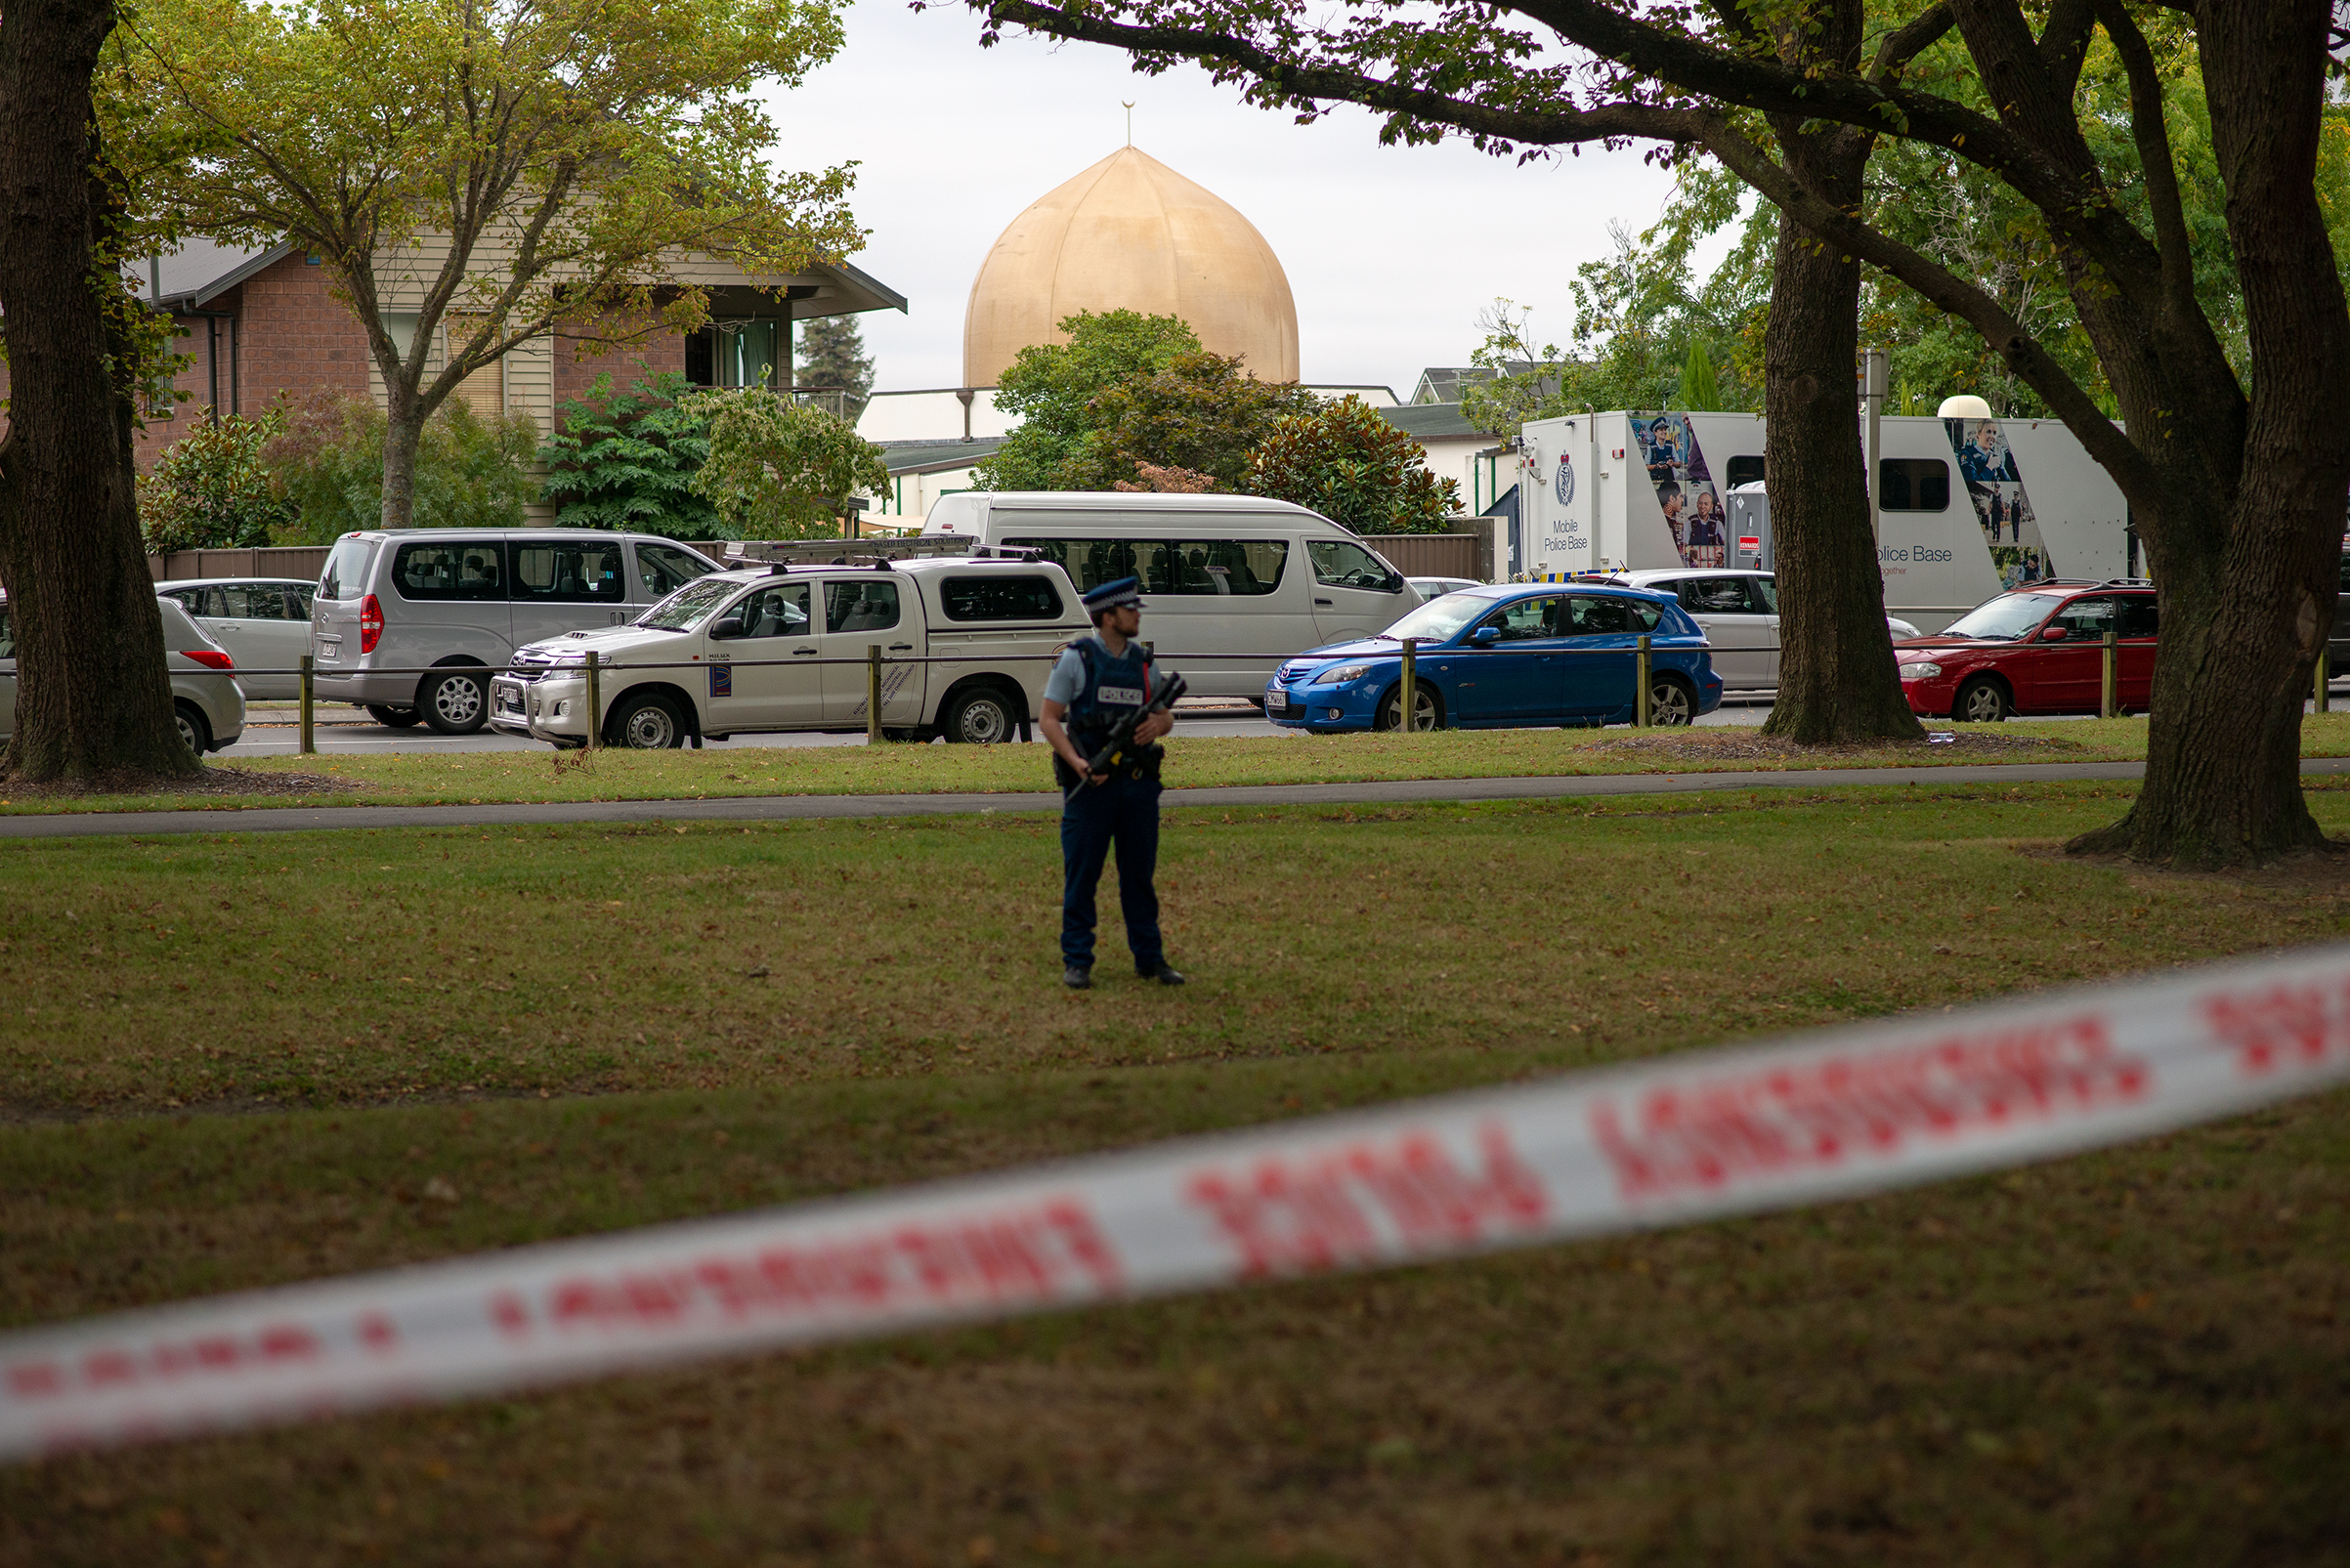 The golden dome of the al-Noor mosque in Christchurch, where 42 worshippers were killed on March 15 (Virginia Woods-Jack for TIME)